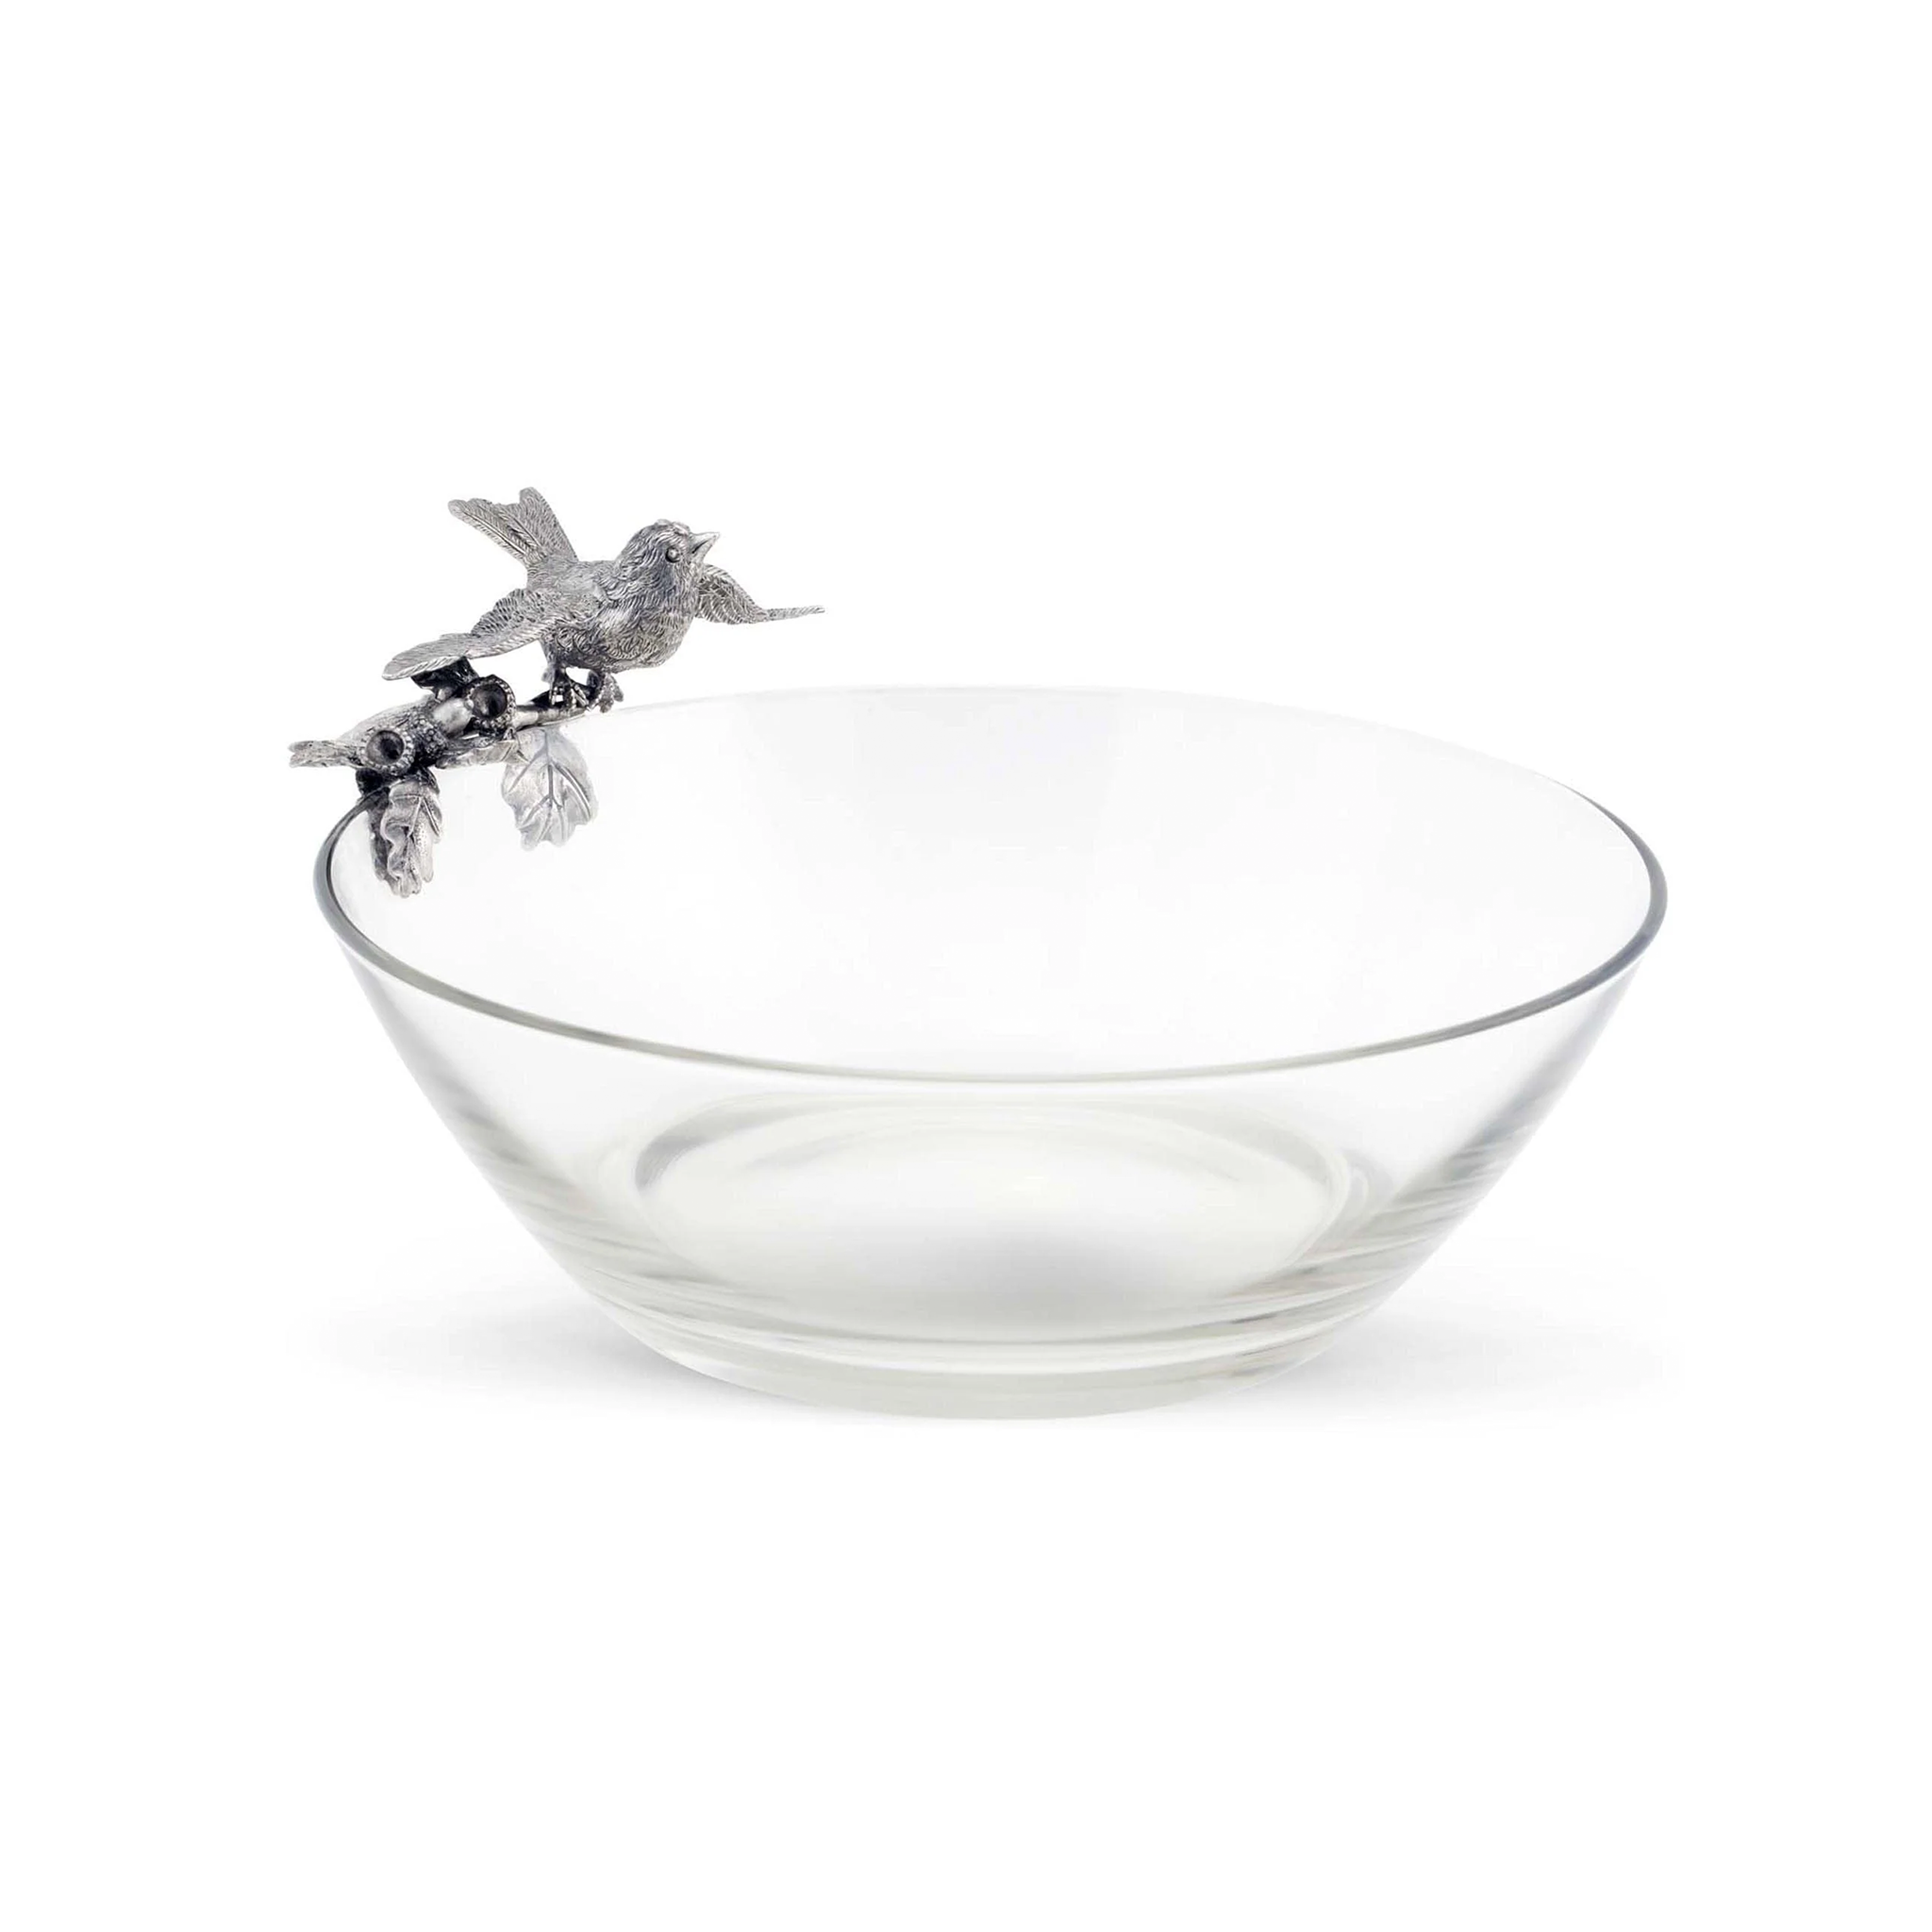 a glass serving bowl with a pewter bird on top of it